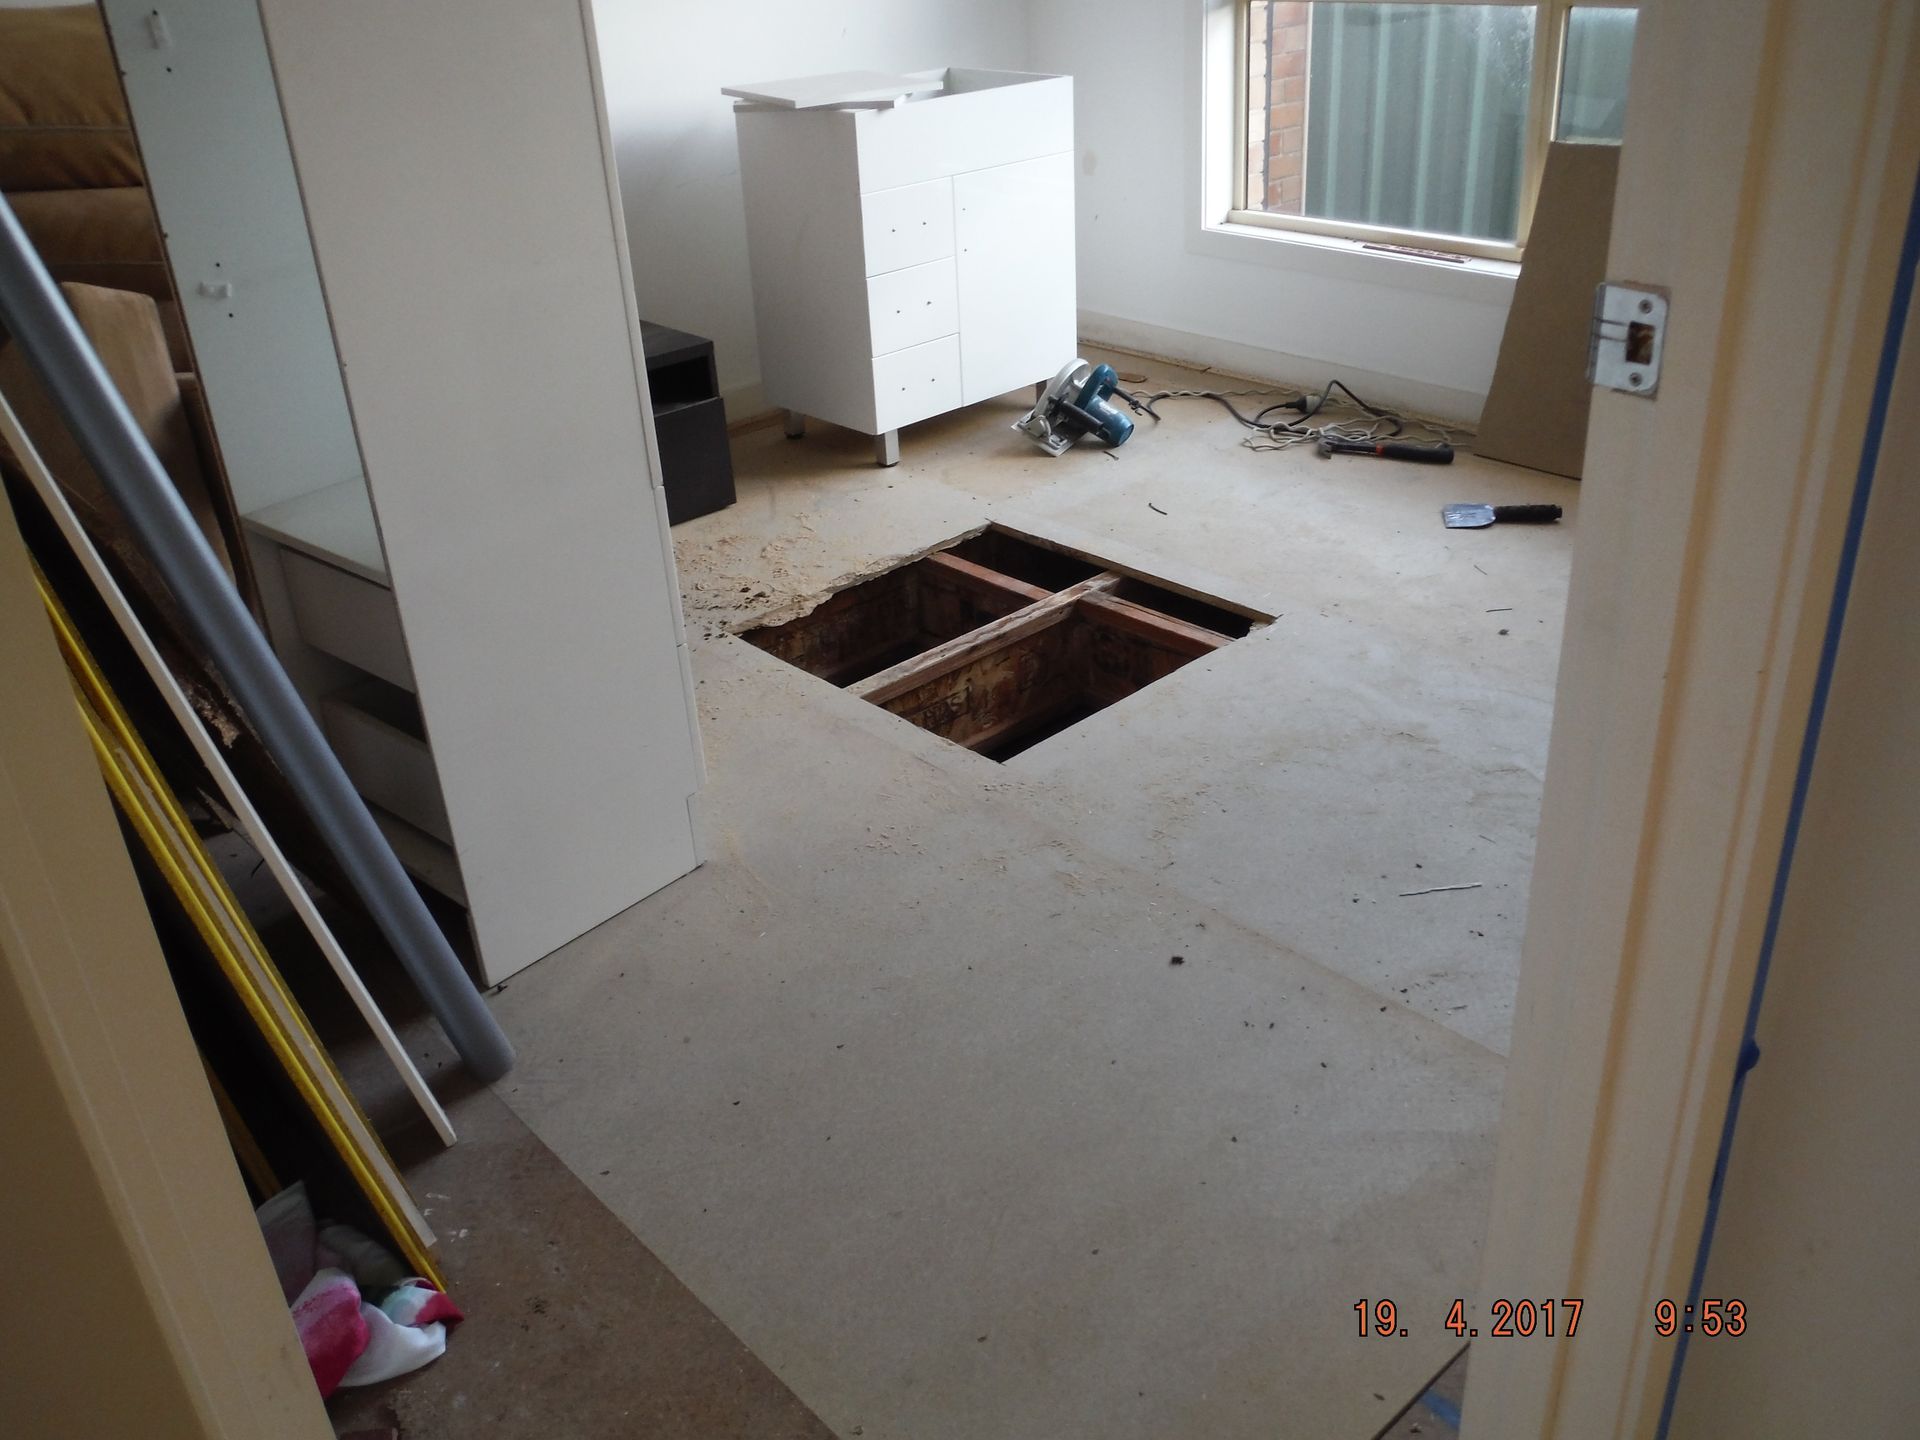 inspect direct building inspections reports melbourne